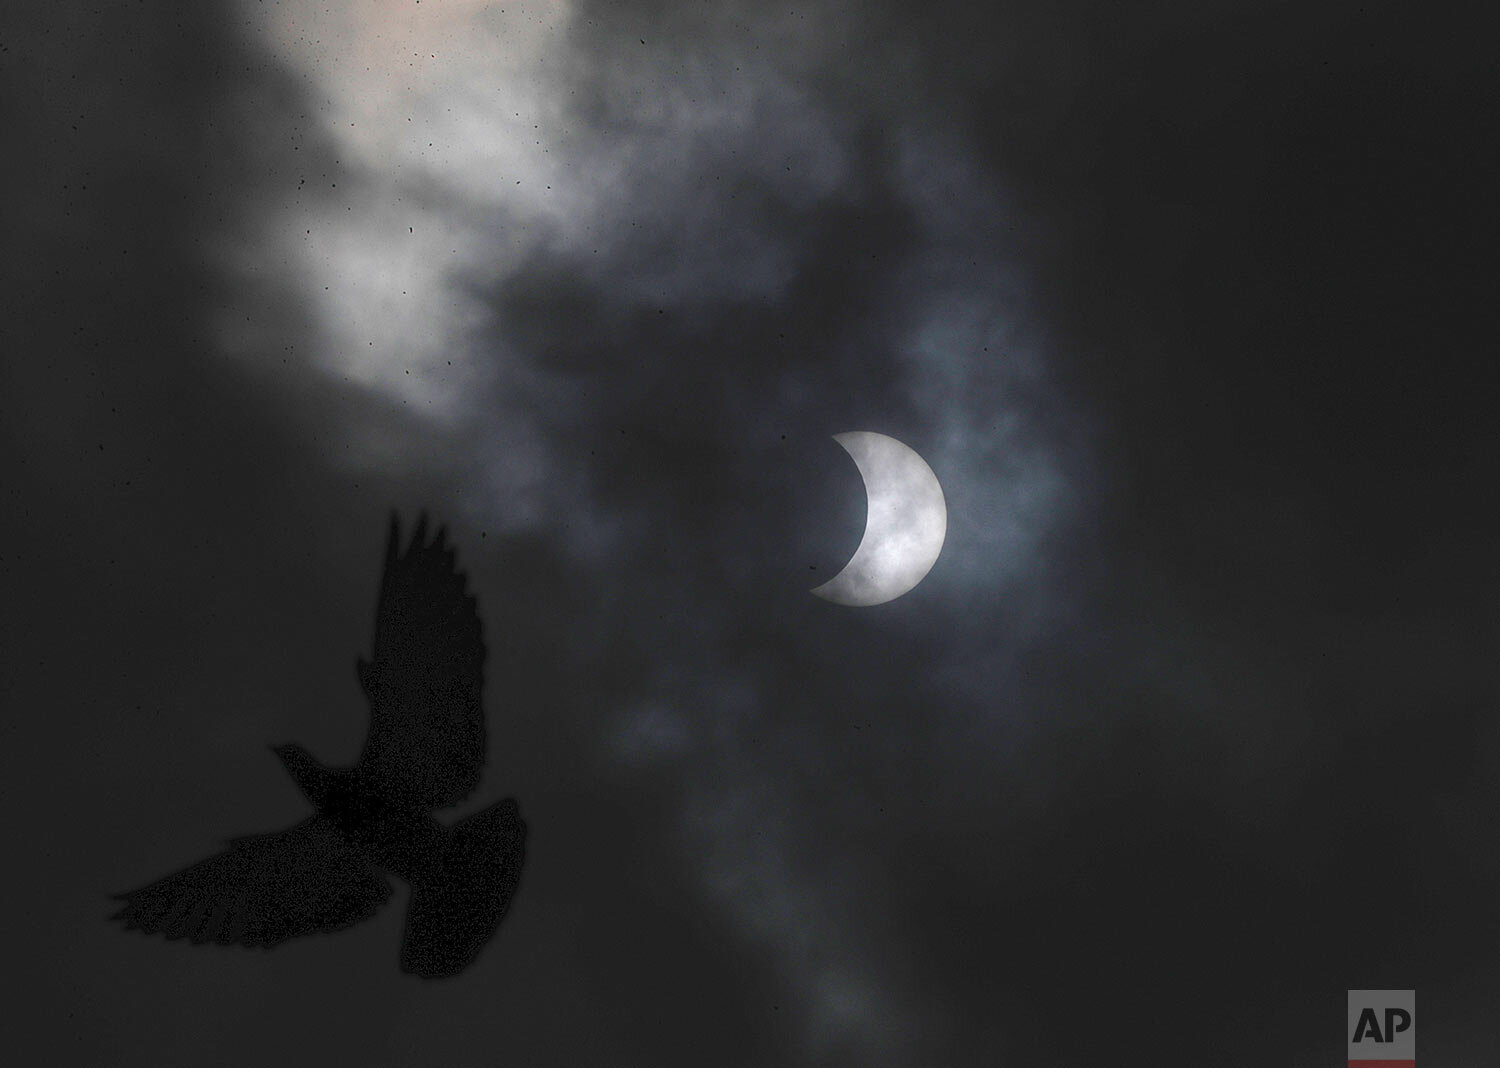  A pigeon flies as the sun forms a crescent during solar eclipse in Hyderabad, India, Sunday, June 21, 2020. (AP Photo/Mahesh Kumar A.) 